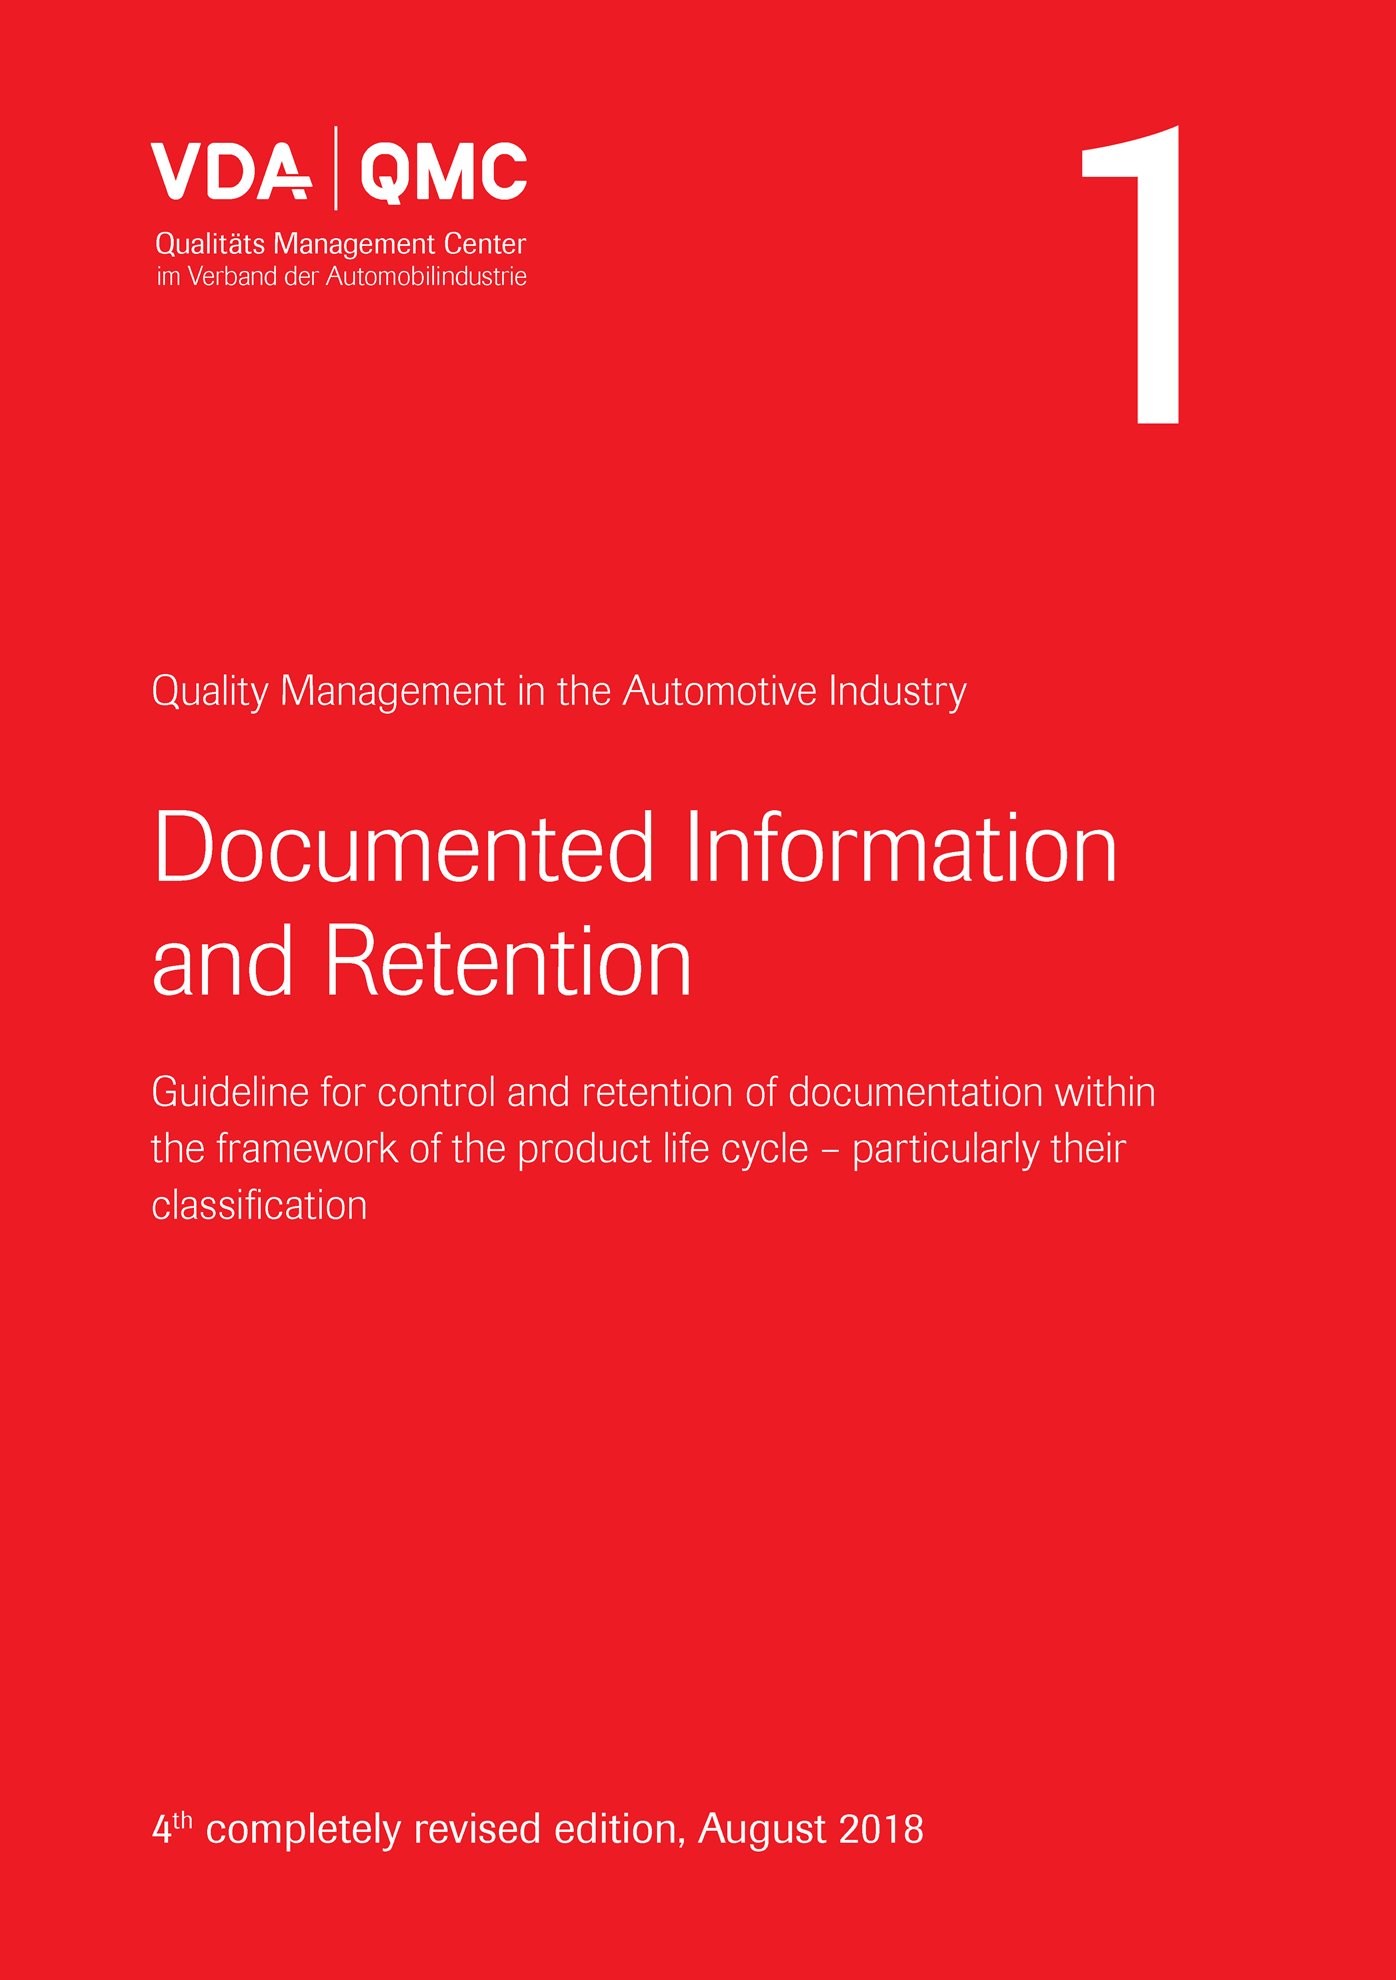 Publications  VDA Volume 1 - Documented Information and Retention, 4th completely revised edition, August 2018 1.8.2018 preview